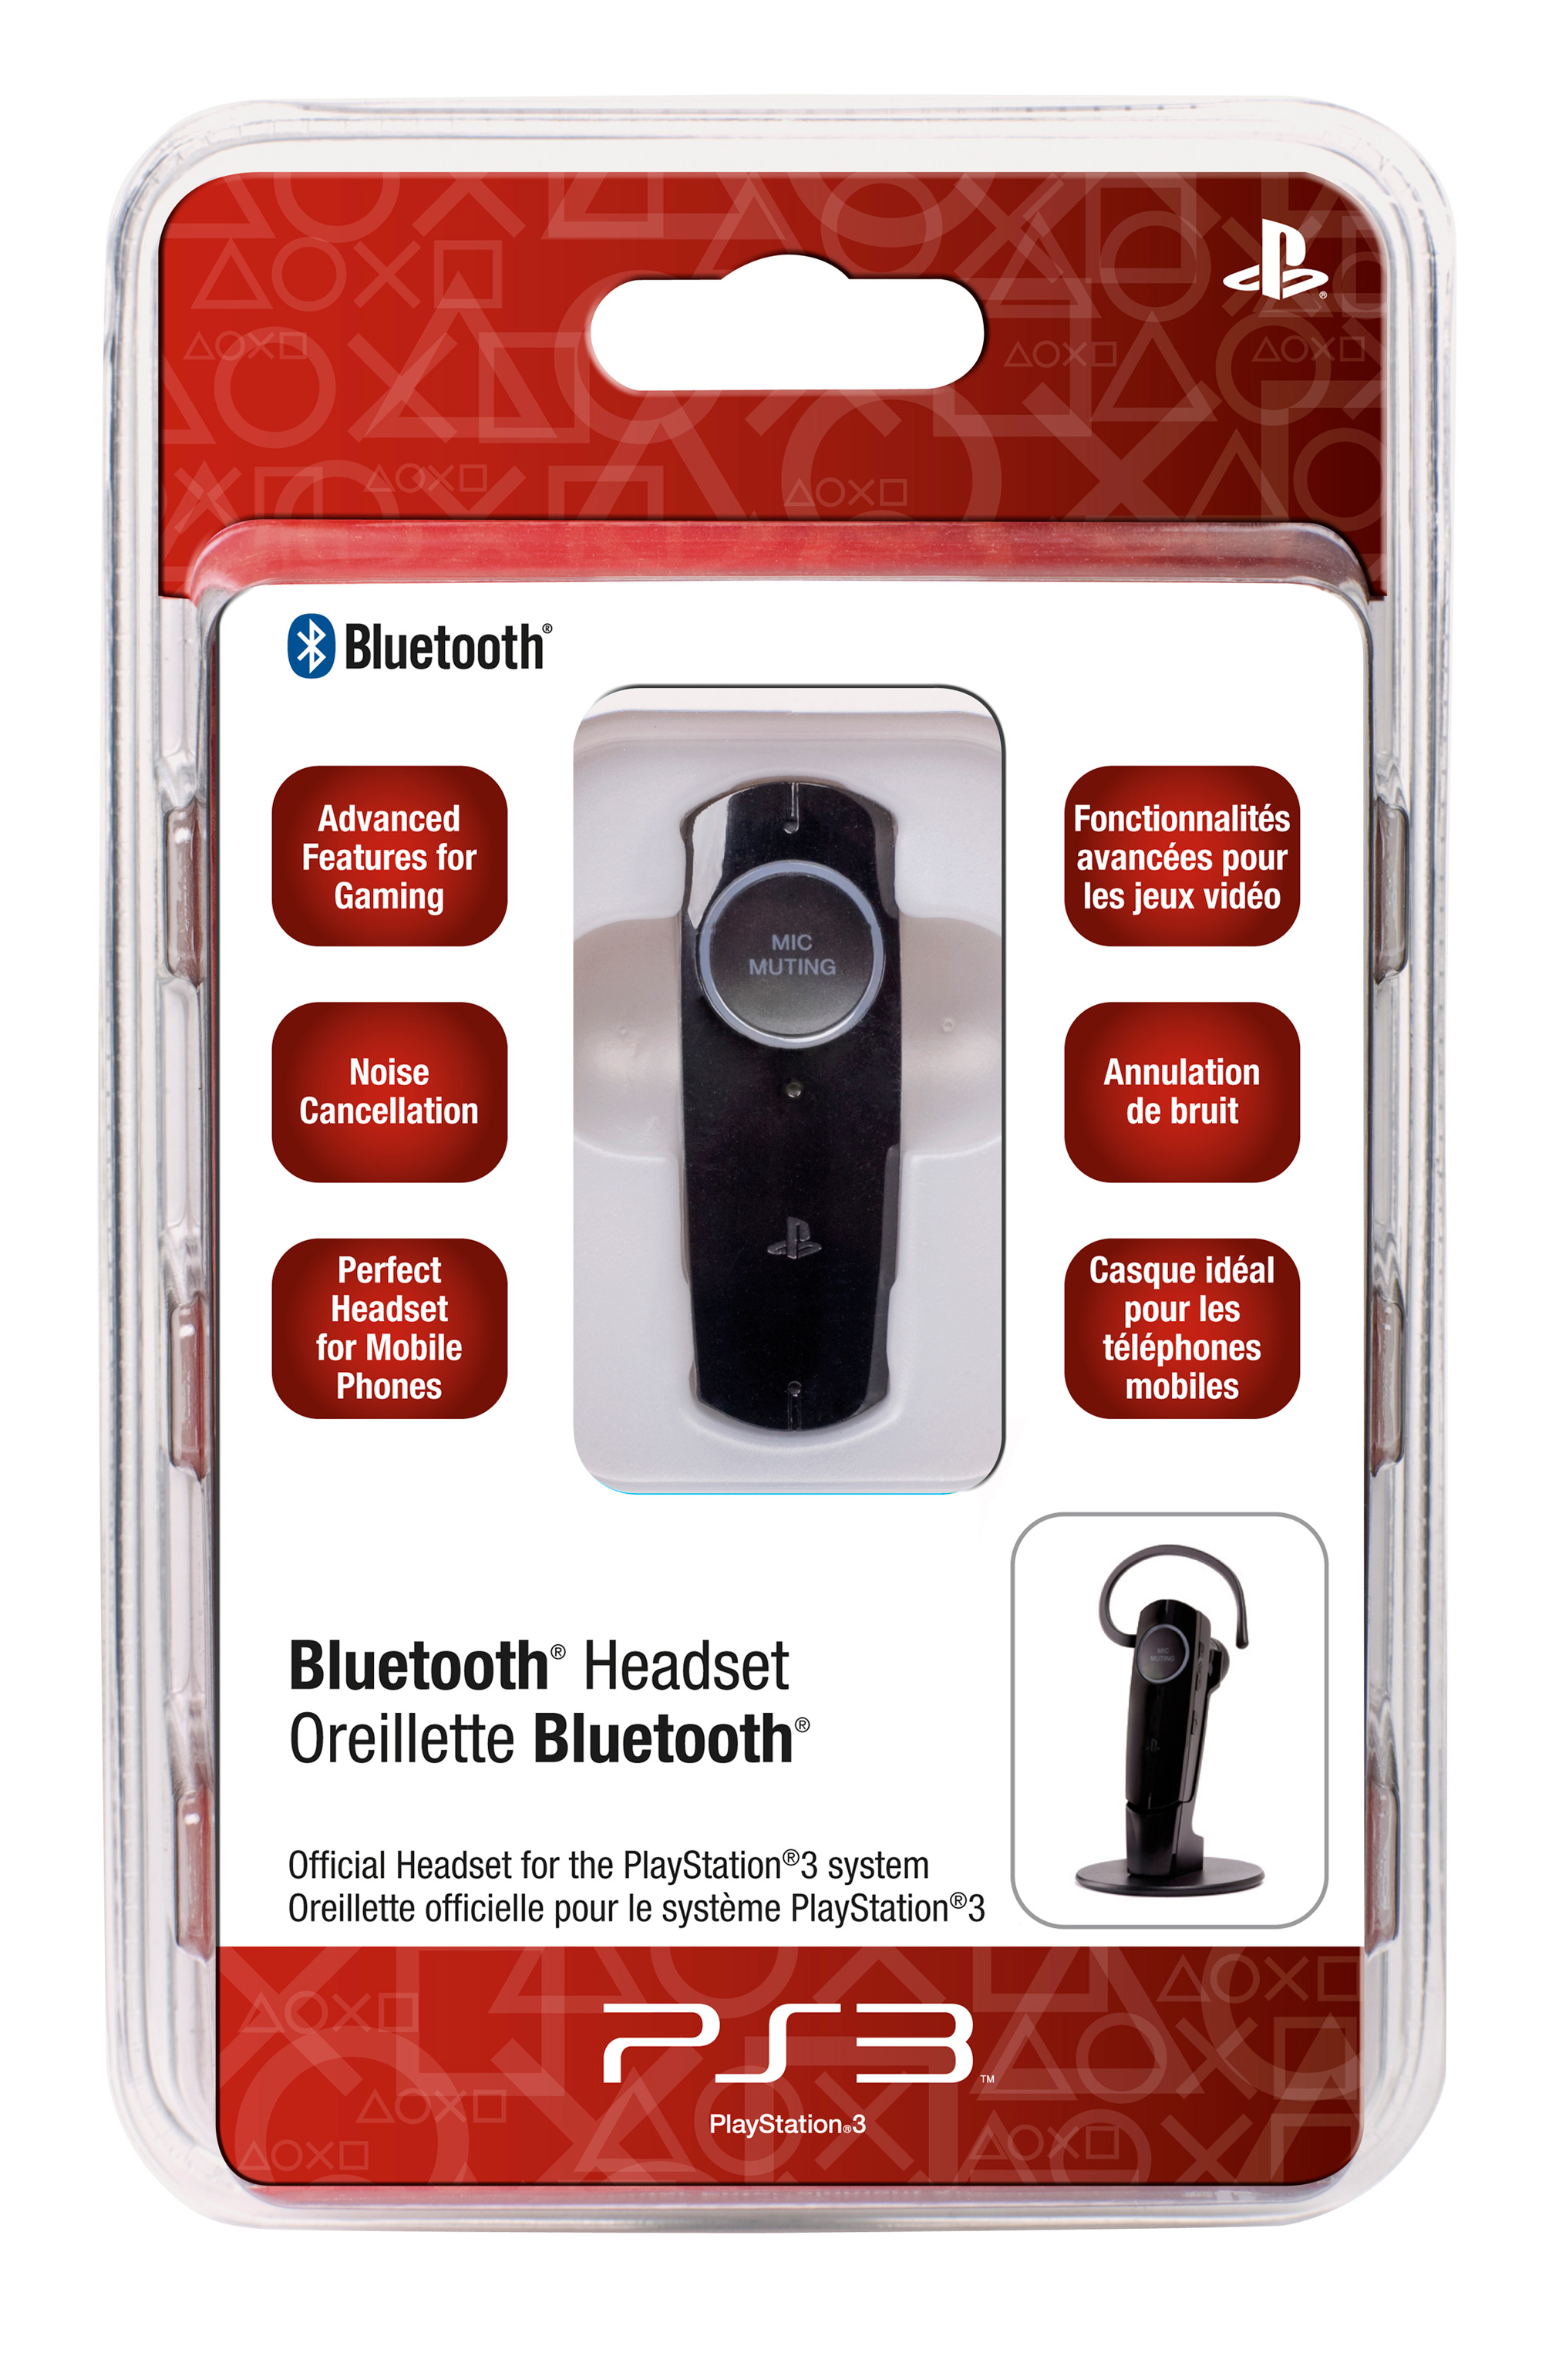 Bluetooth Voice Chat Software